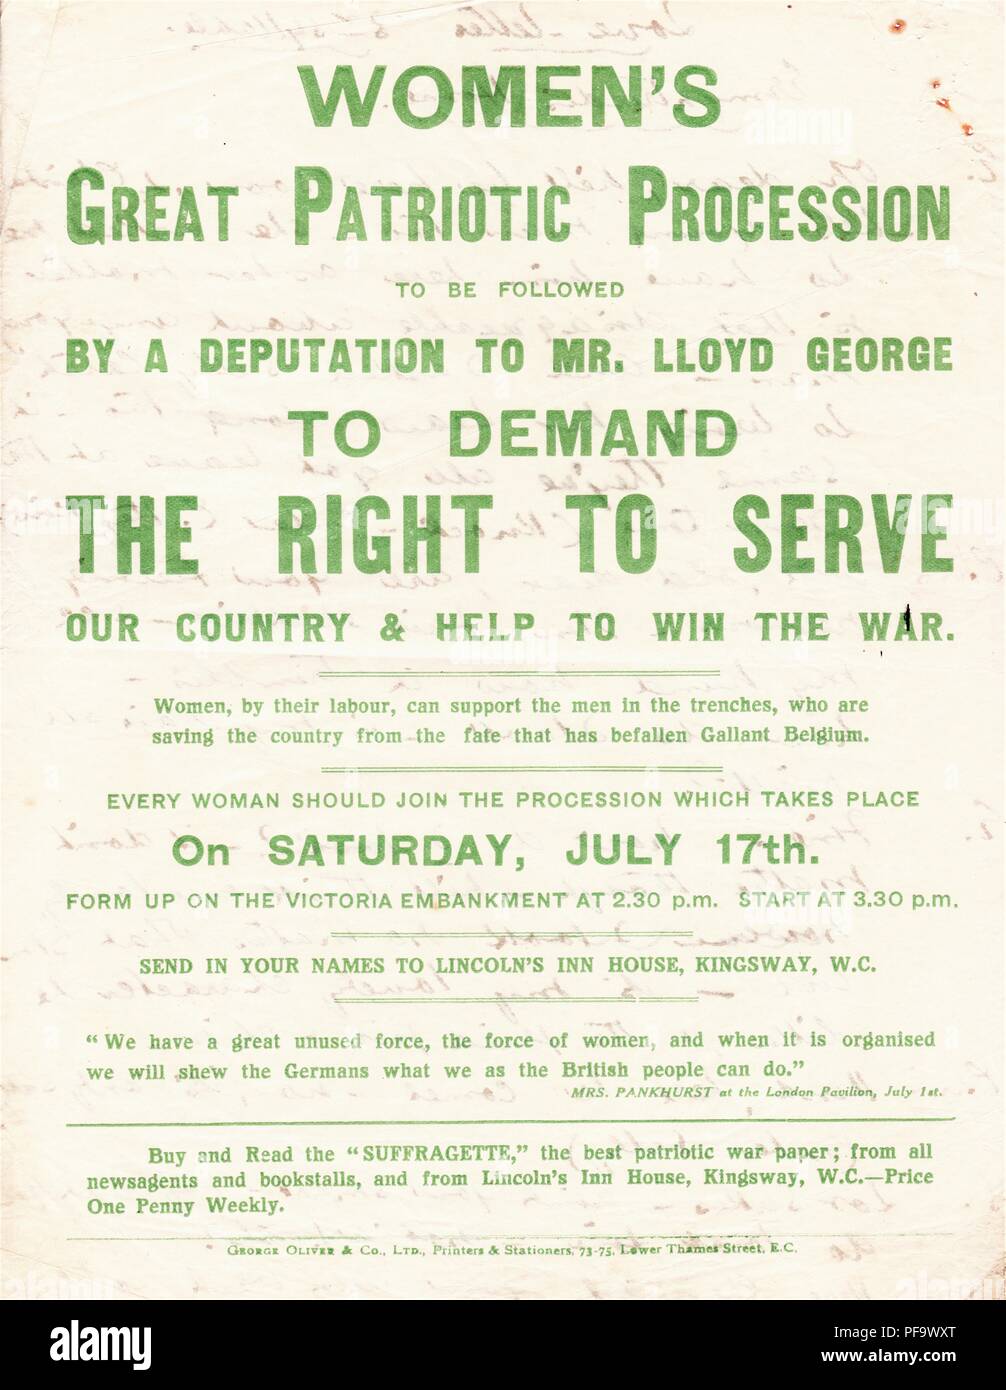 World War I suffrage poster, advertising a 'Women's Great Patriotic Procession, ' and deputation to Mr Lloyd George, to demand the right to aid the war effort, published for the British market, circa 1914-1918, 1916. () Stock Photo